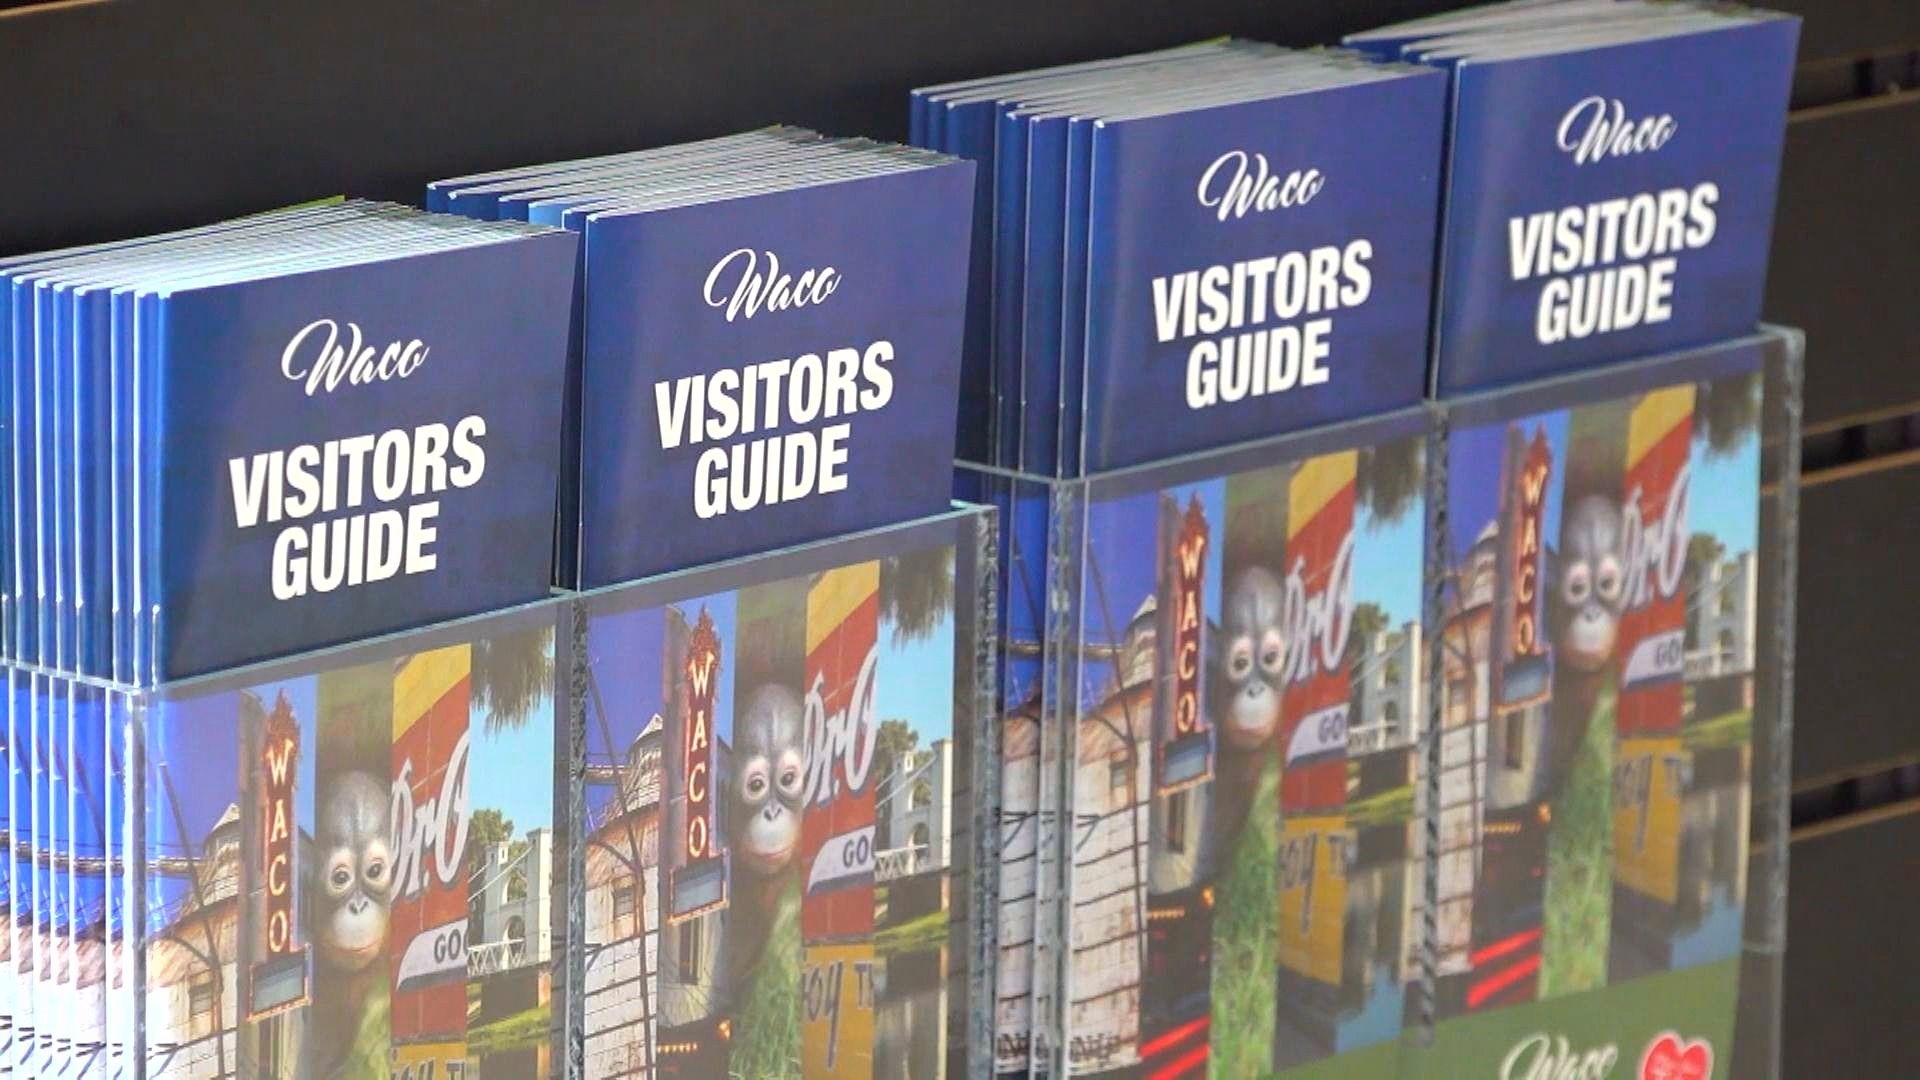 The City of Waco saw a lot of tourism in 2019 and they expect more in 2020.